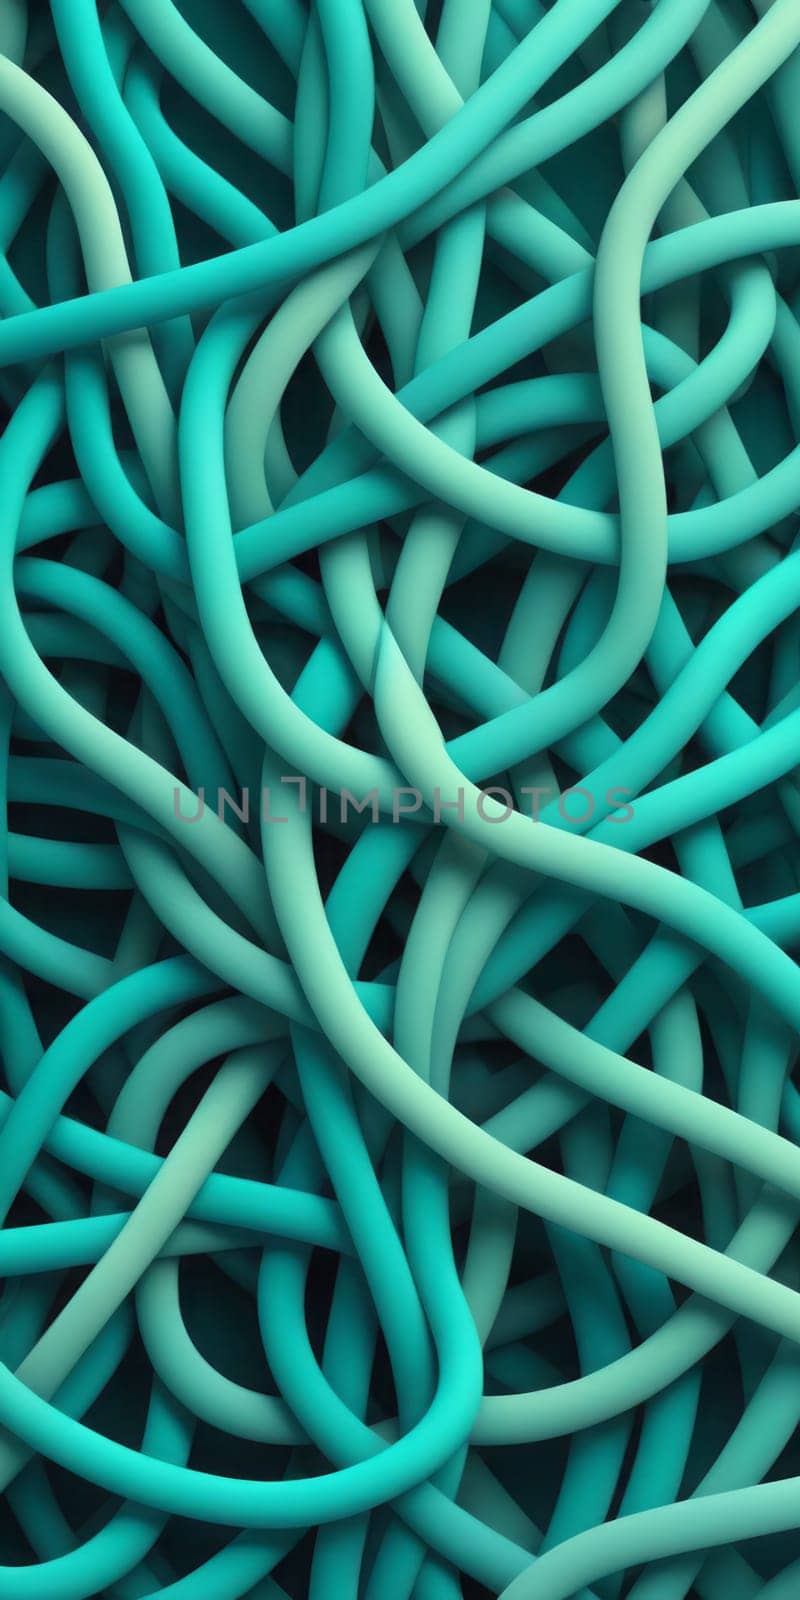 Knotted Shapes in Teal Gainsboro by nkotlyar